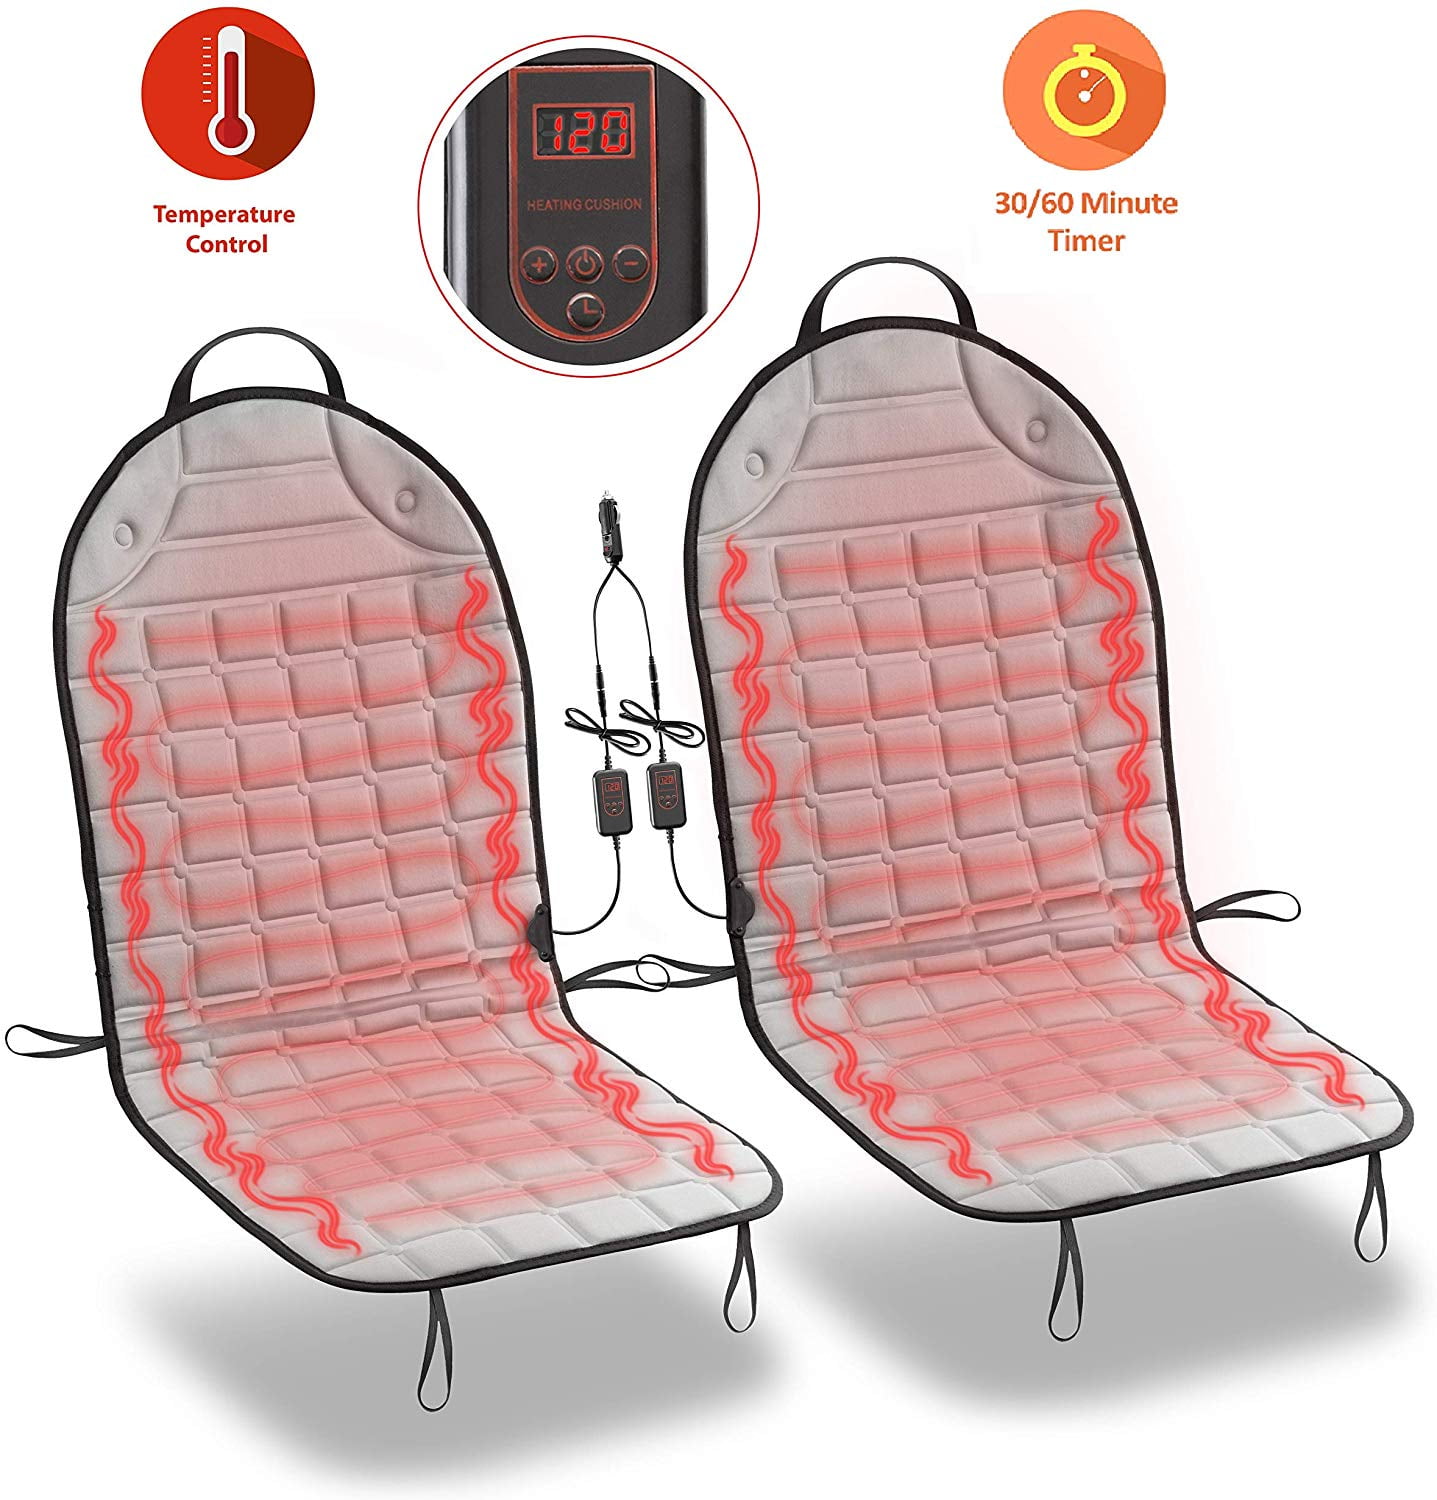 XUETING Car Seat Warmer with 2 Heat Settings Car Seat Cushions for Adults Warming Hot Cushion for car,office,vehicles,chair 1pcs 